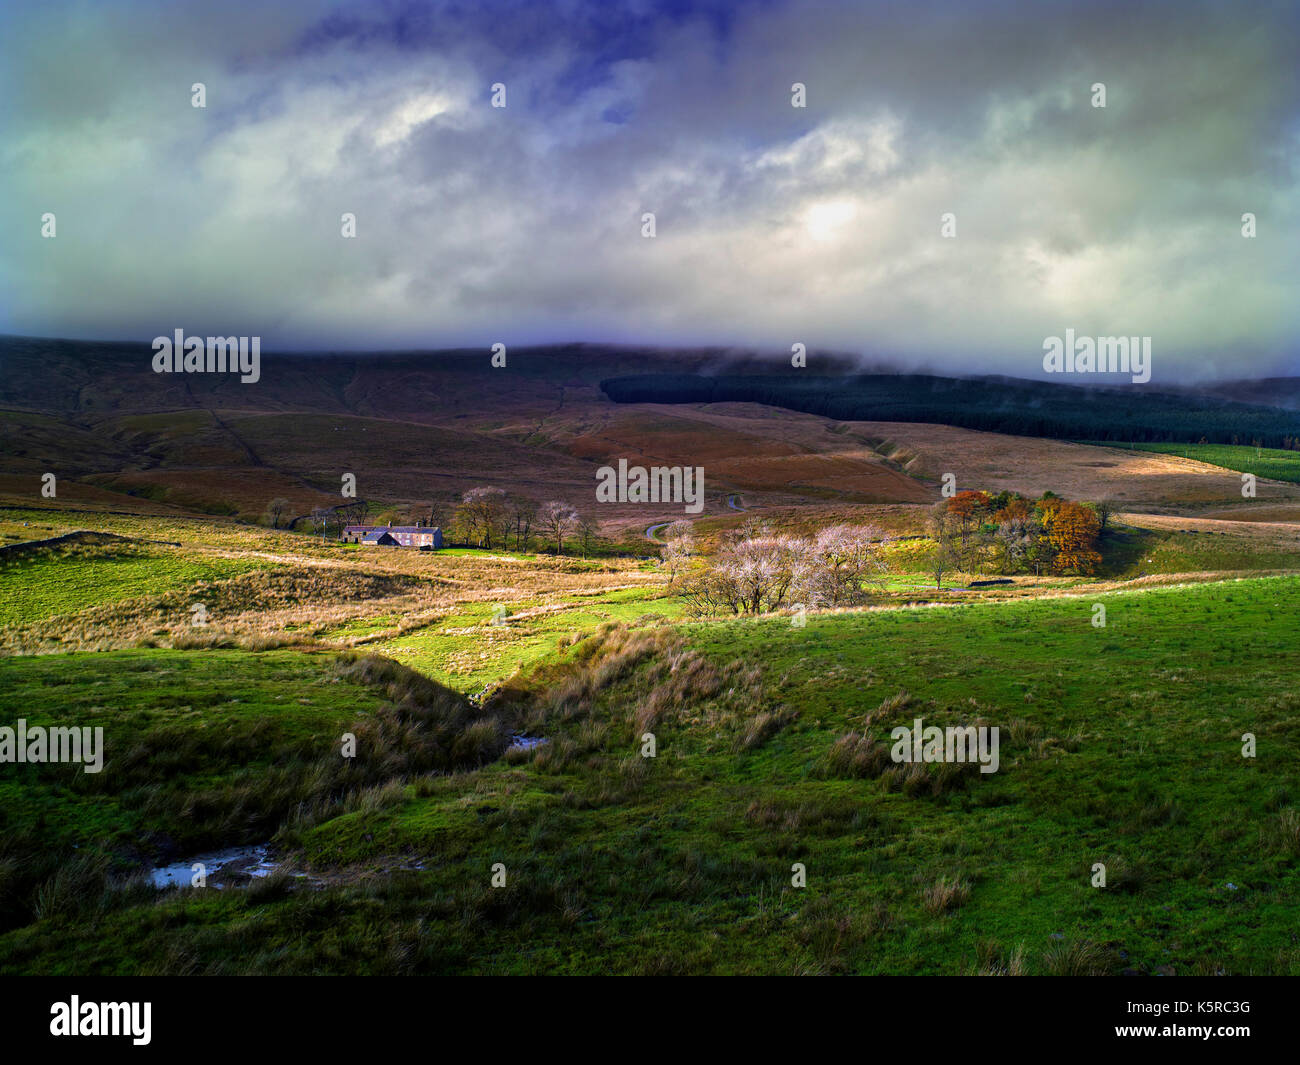 A view of Widdale in Wensleydale, North Yorkshire, as a beam of sunlight breaks through a stormy sky Stock Photo